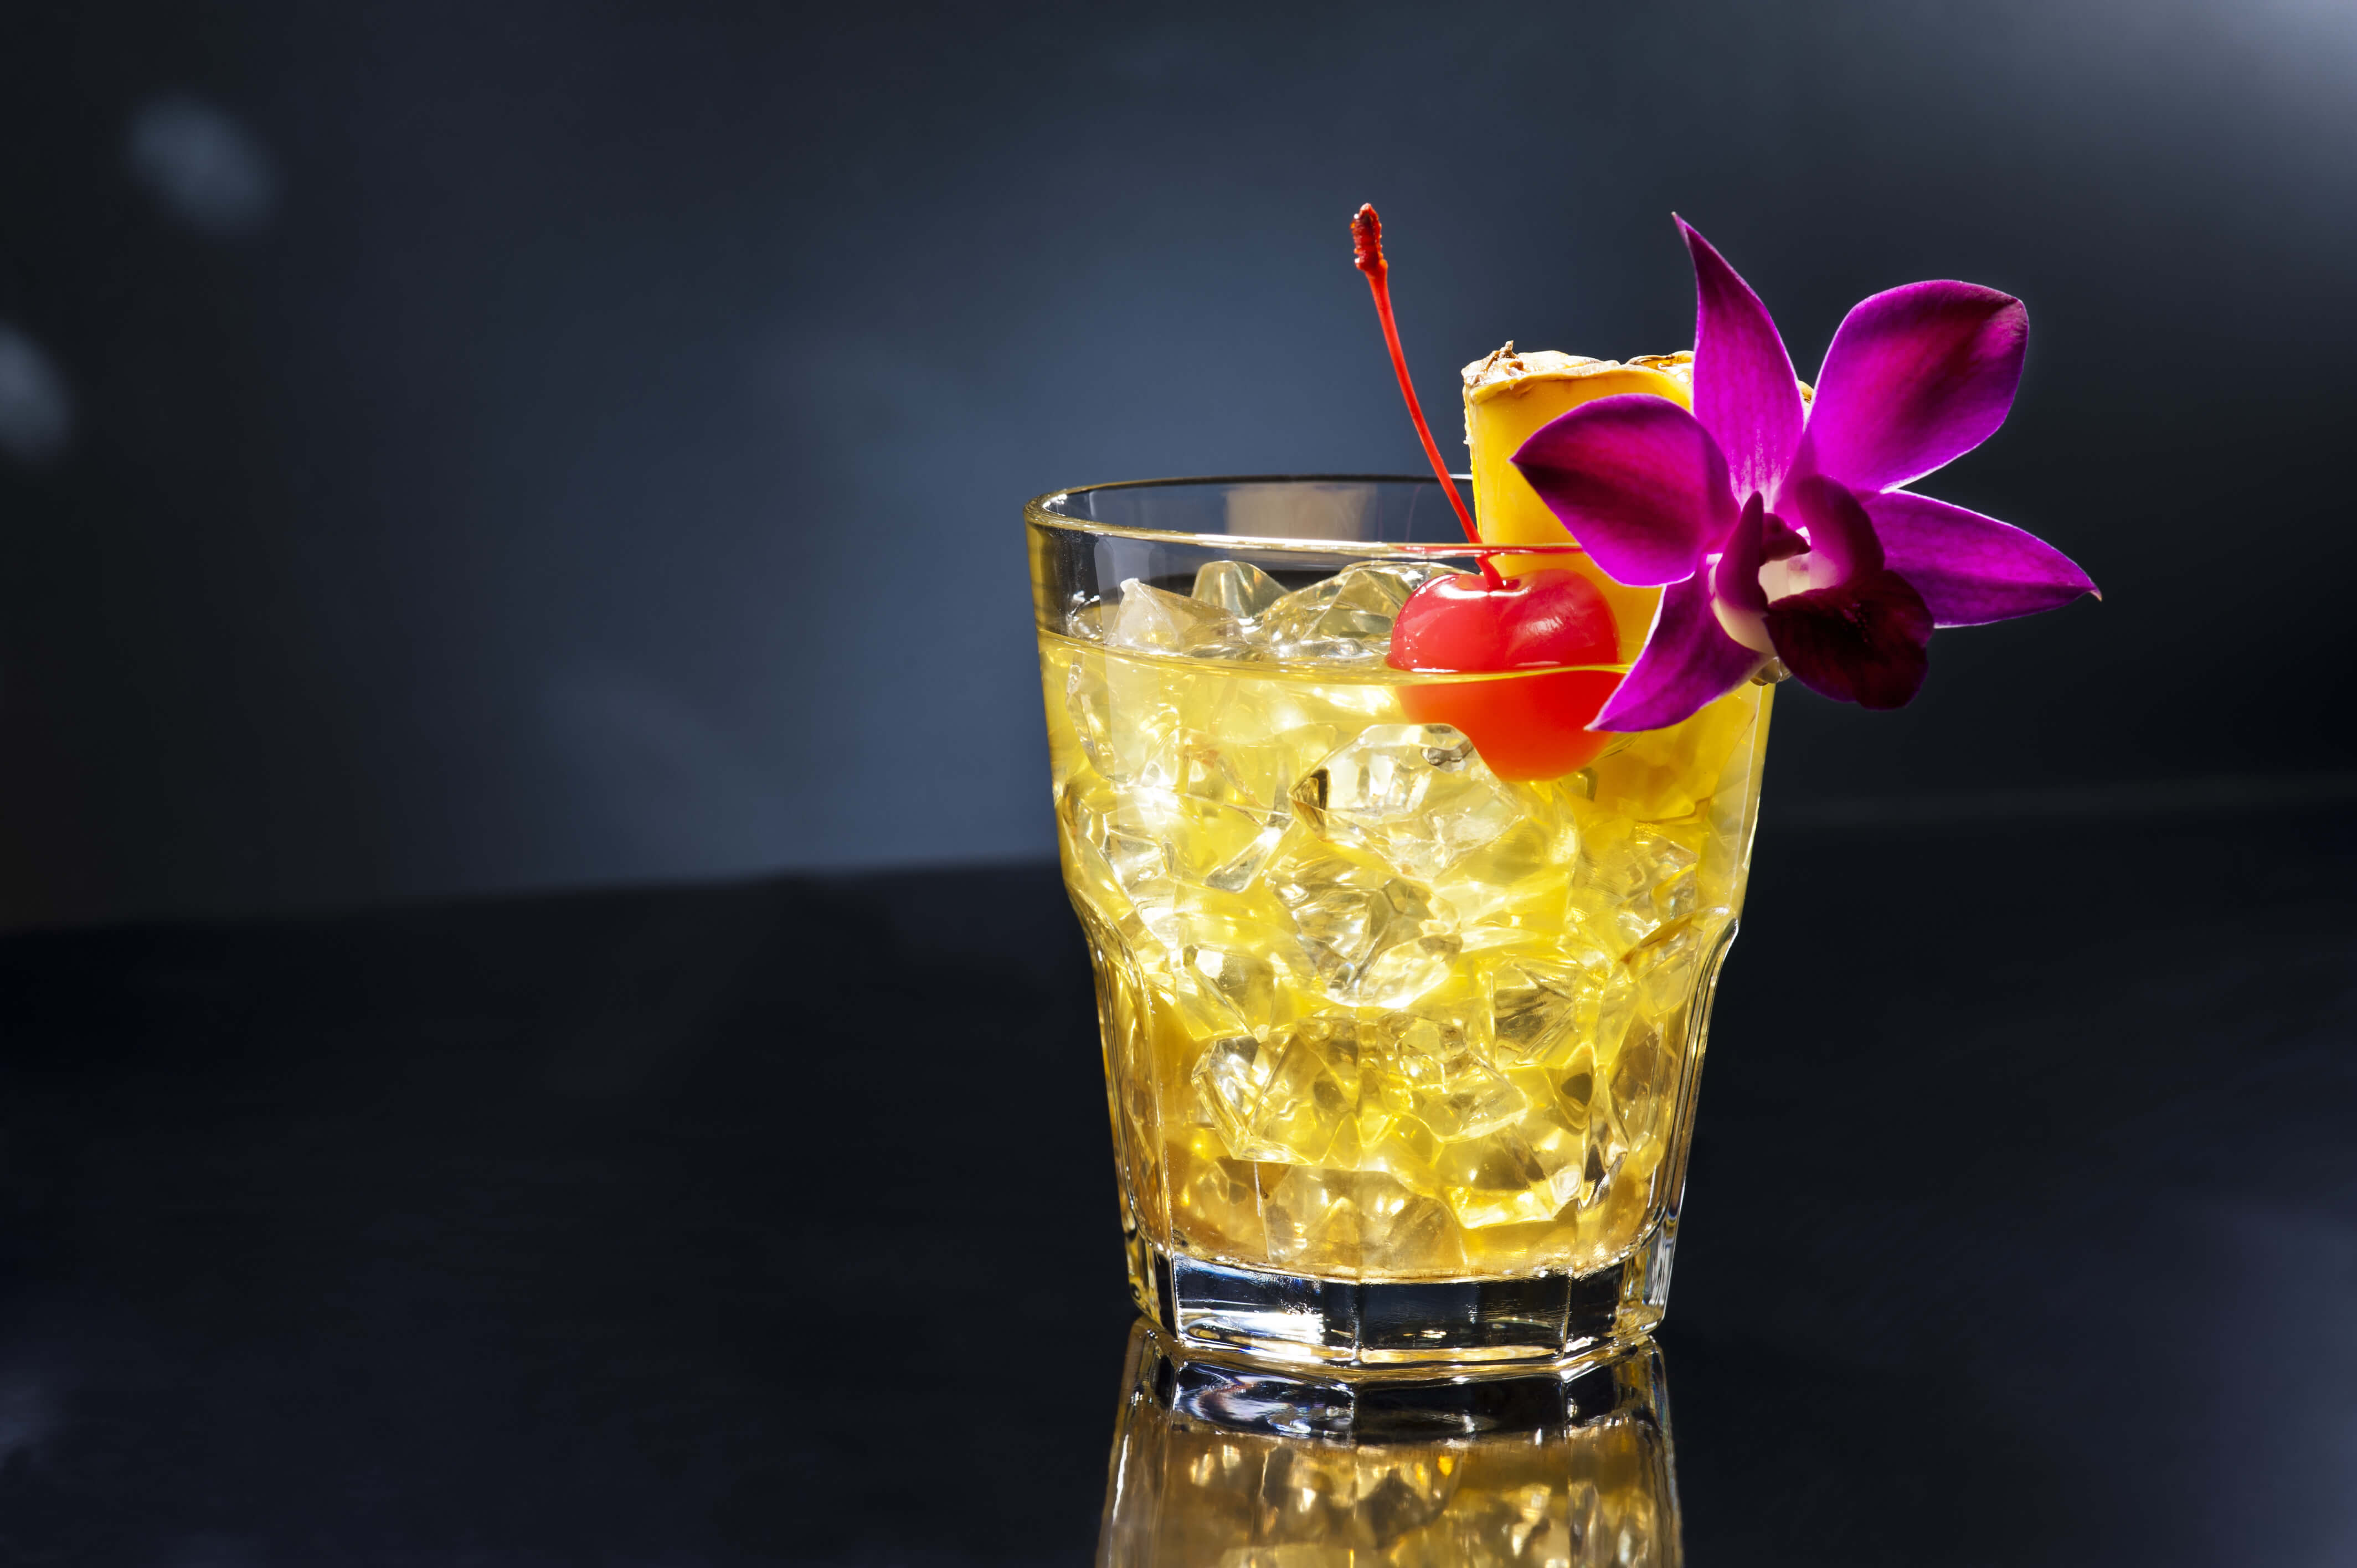 The mai tai is one of Hawaii's most well-known cocktails.